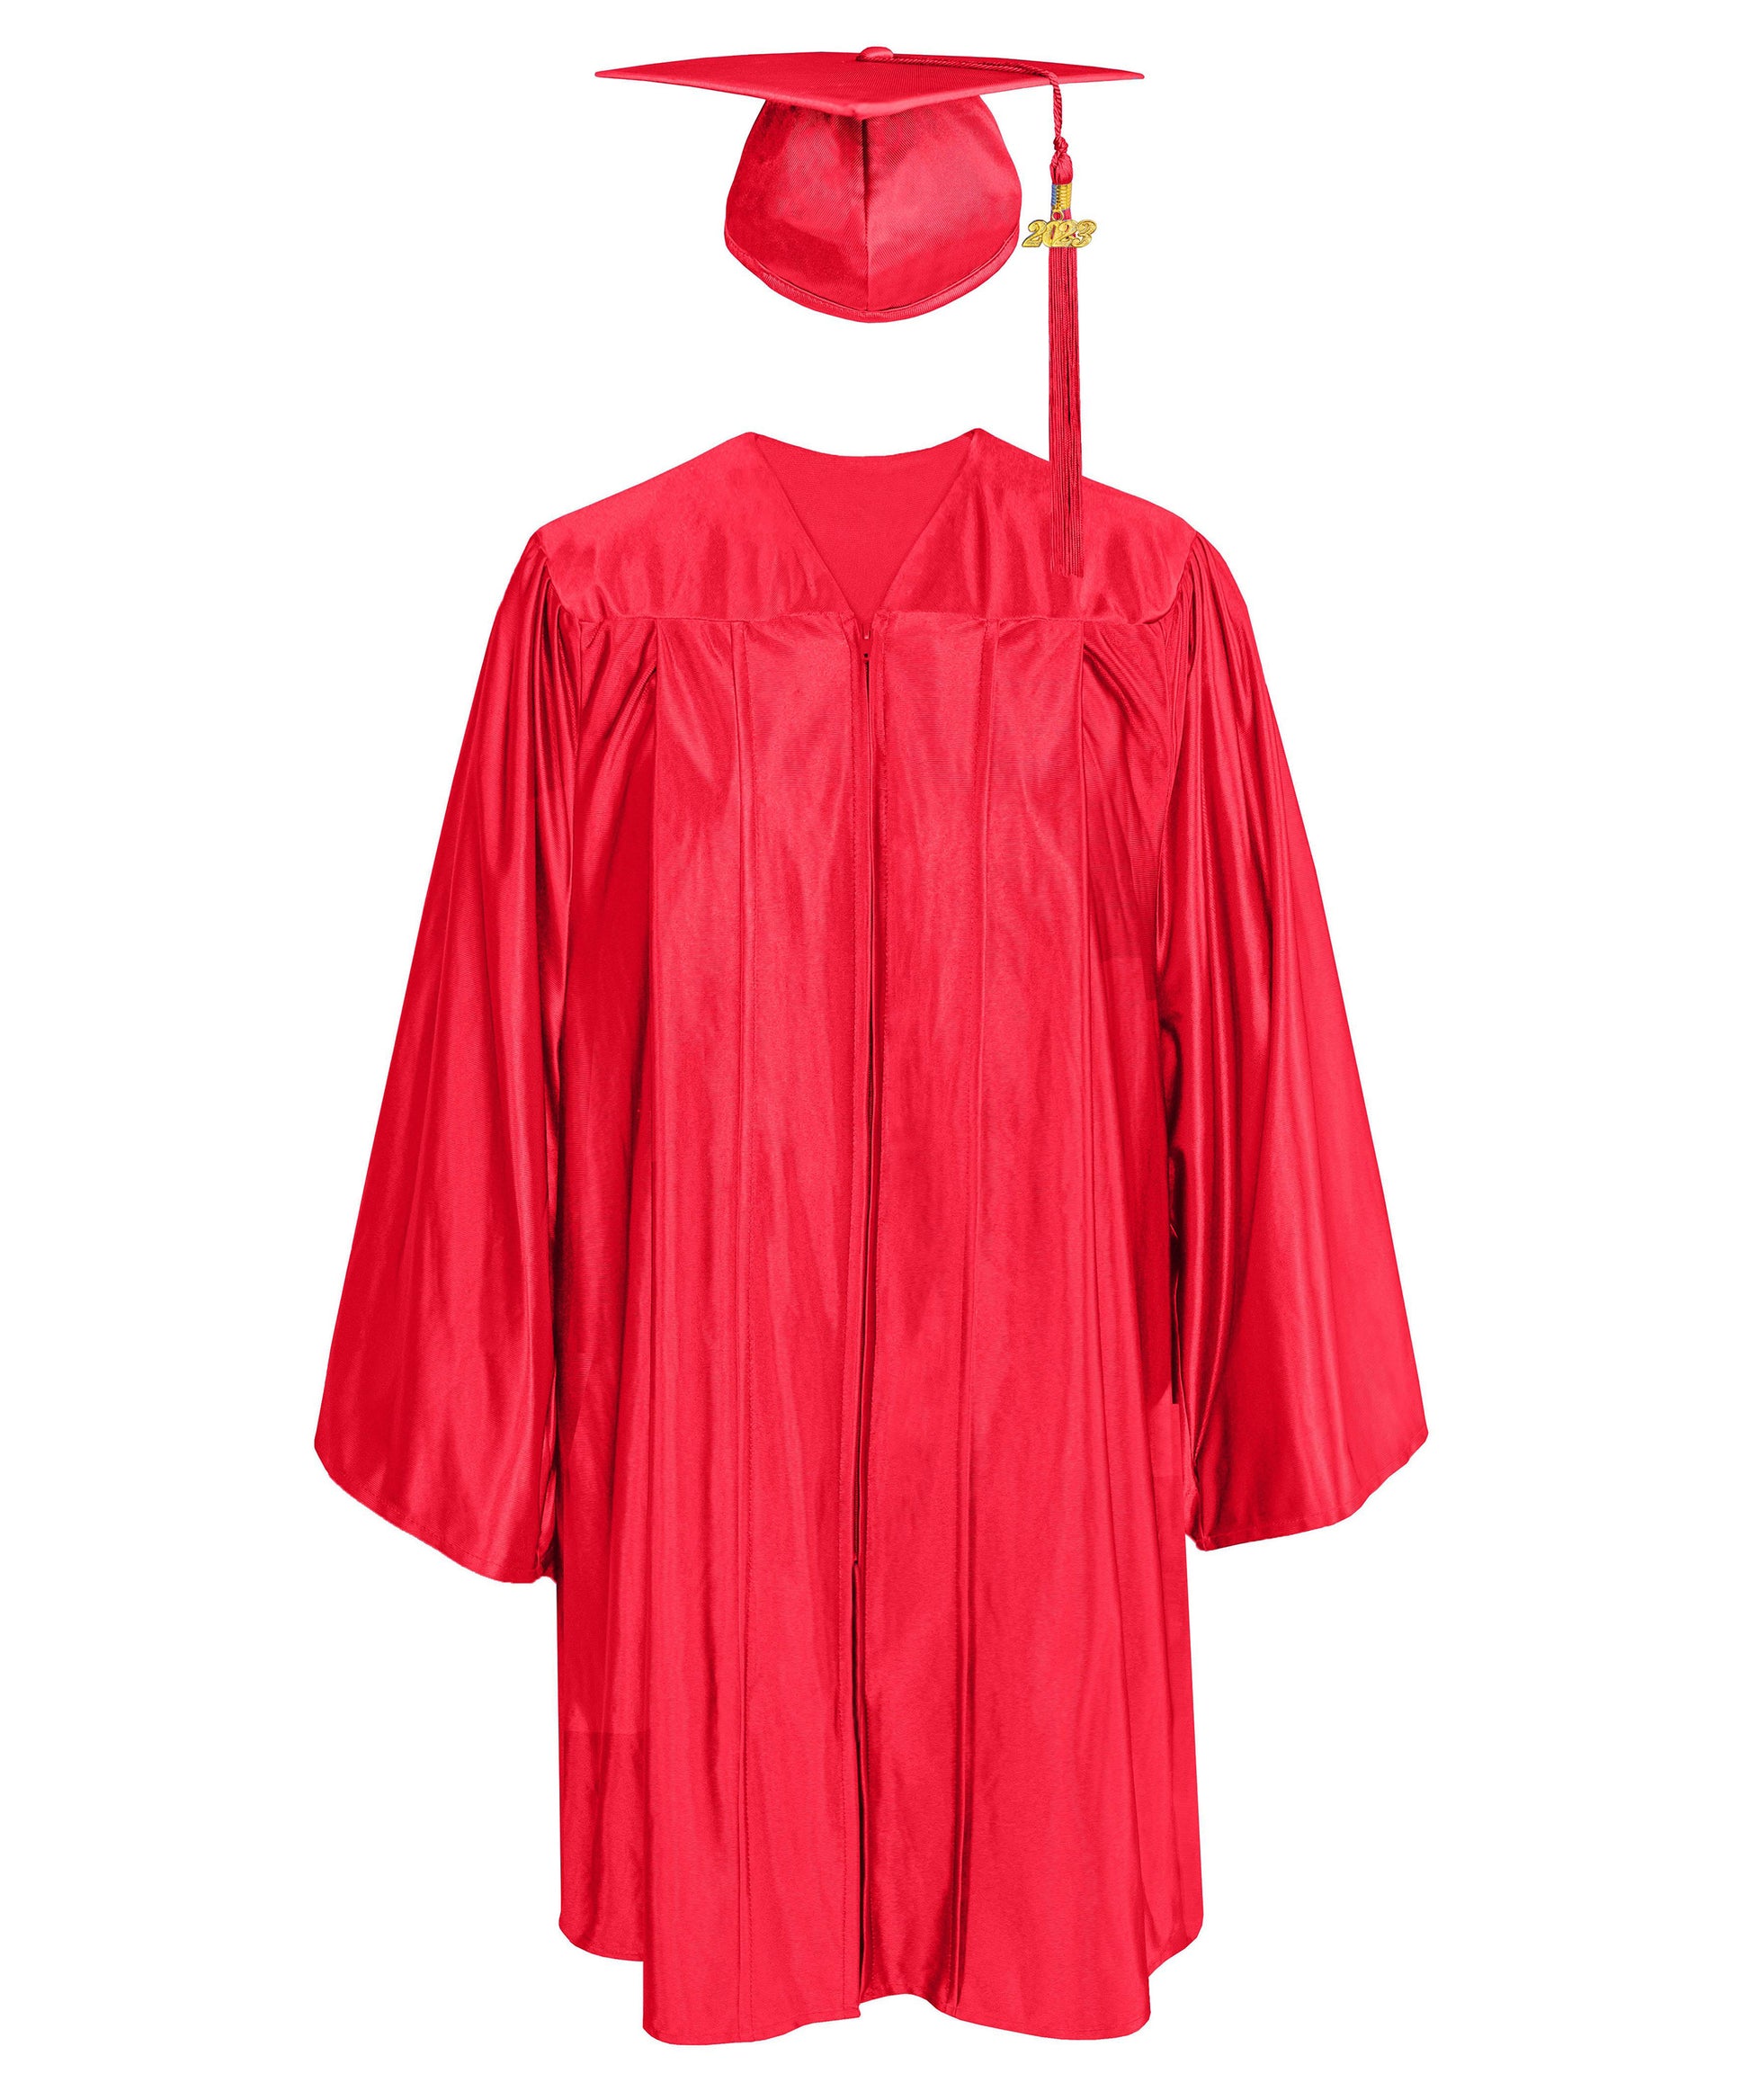 Shiny Kid Cap and Gown with Tassel Charm for Kindergarten